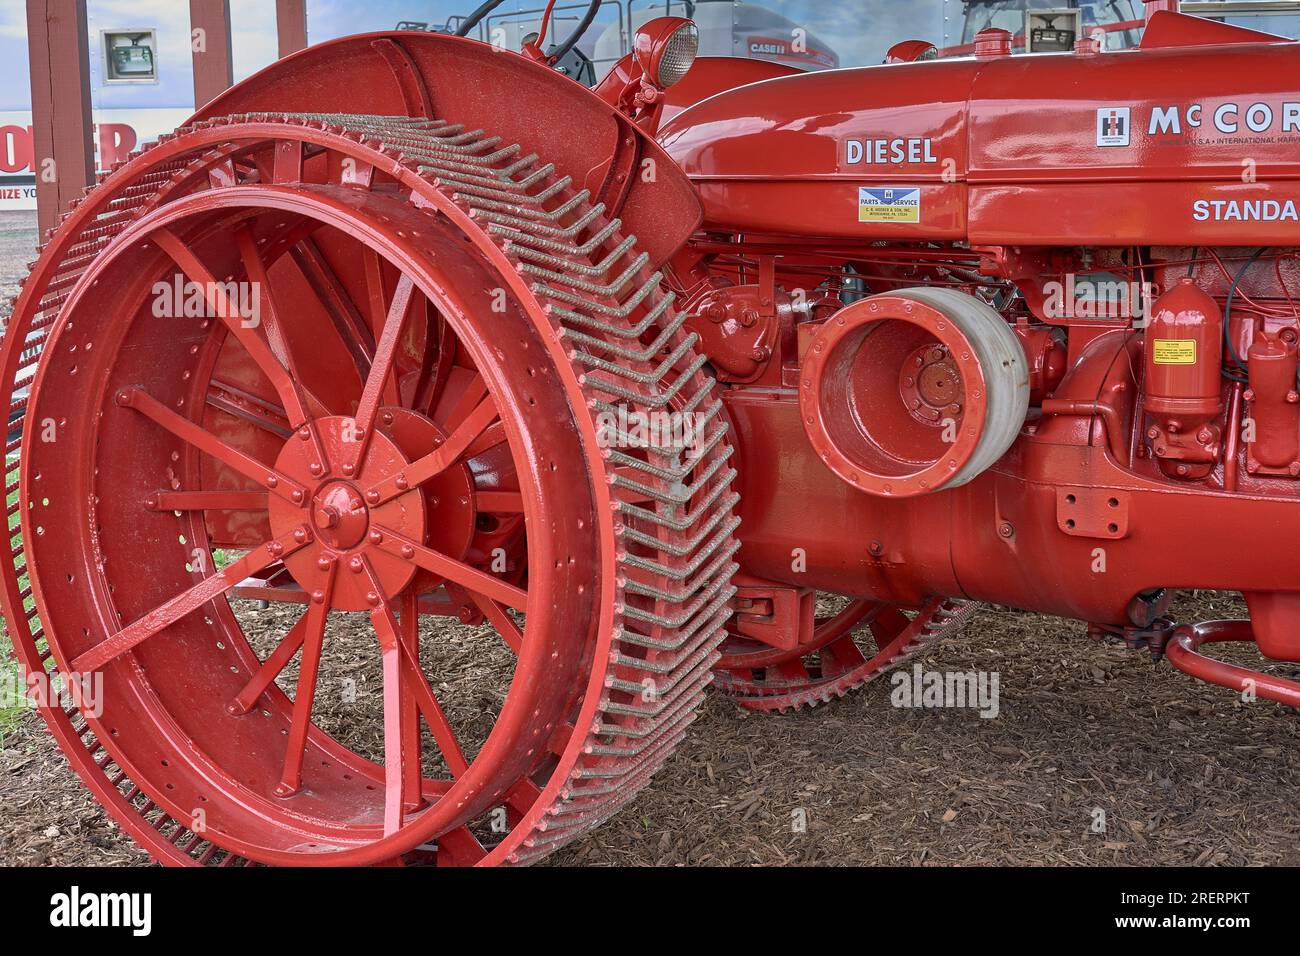 Restored red McCormick diesel antique farm tractor at the 2023 Delaware State Fair in Harrington, Delaware USA. Stock Photo